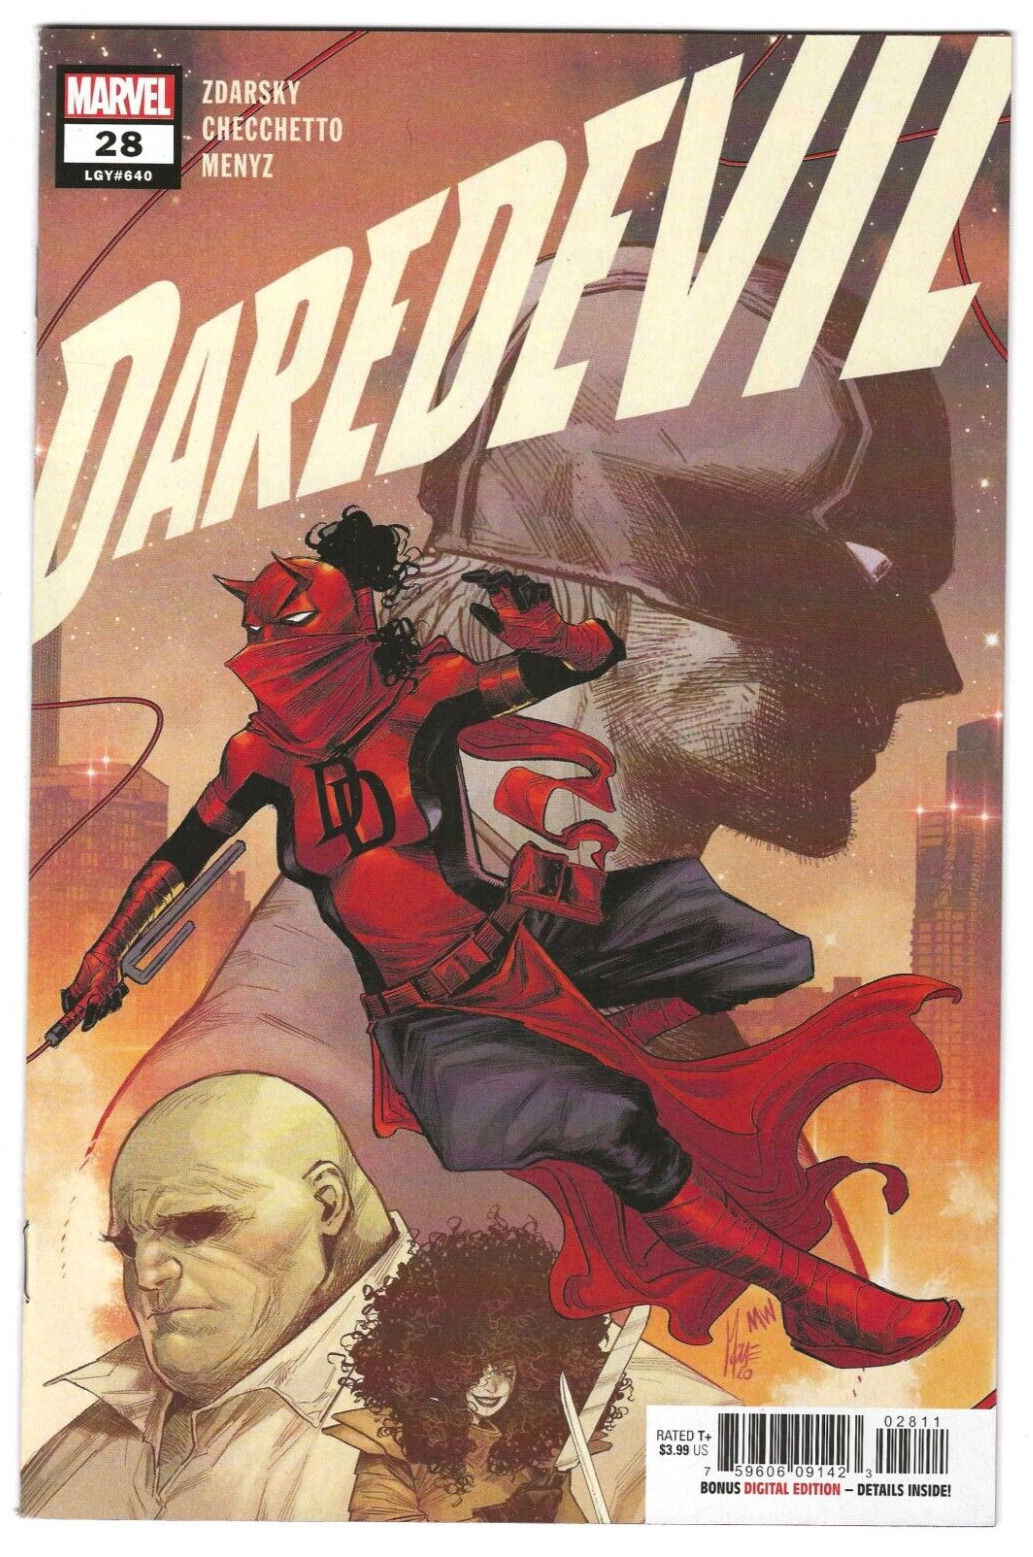 Marvel Comics DAREDEVIL #28 first printing cover A